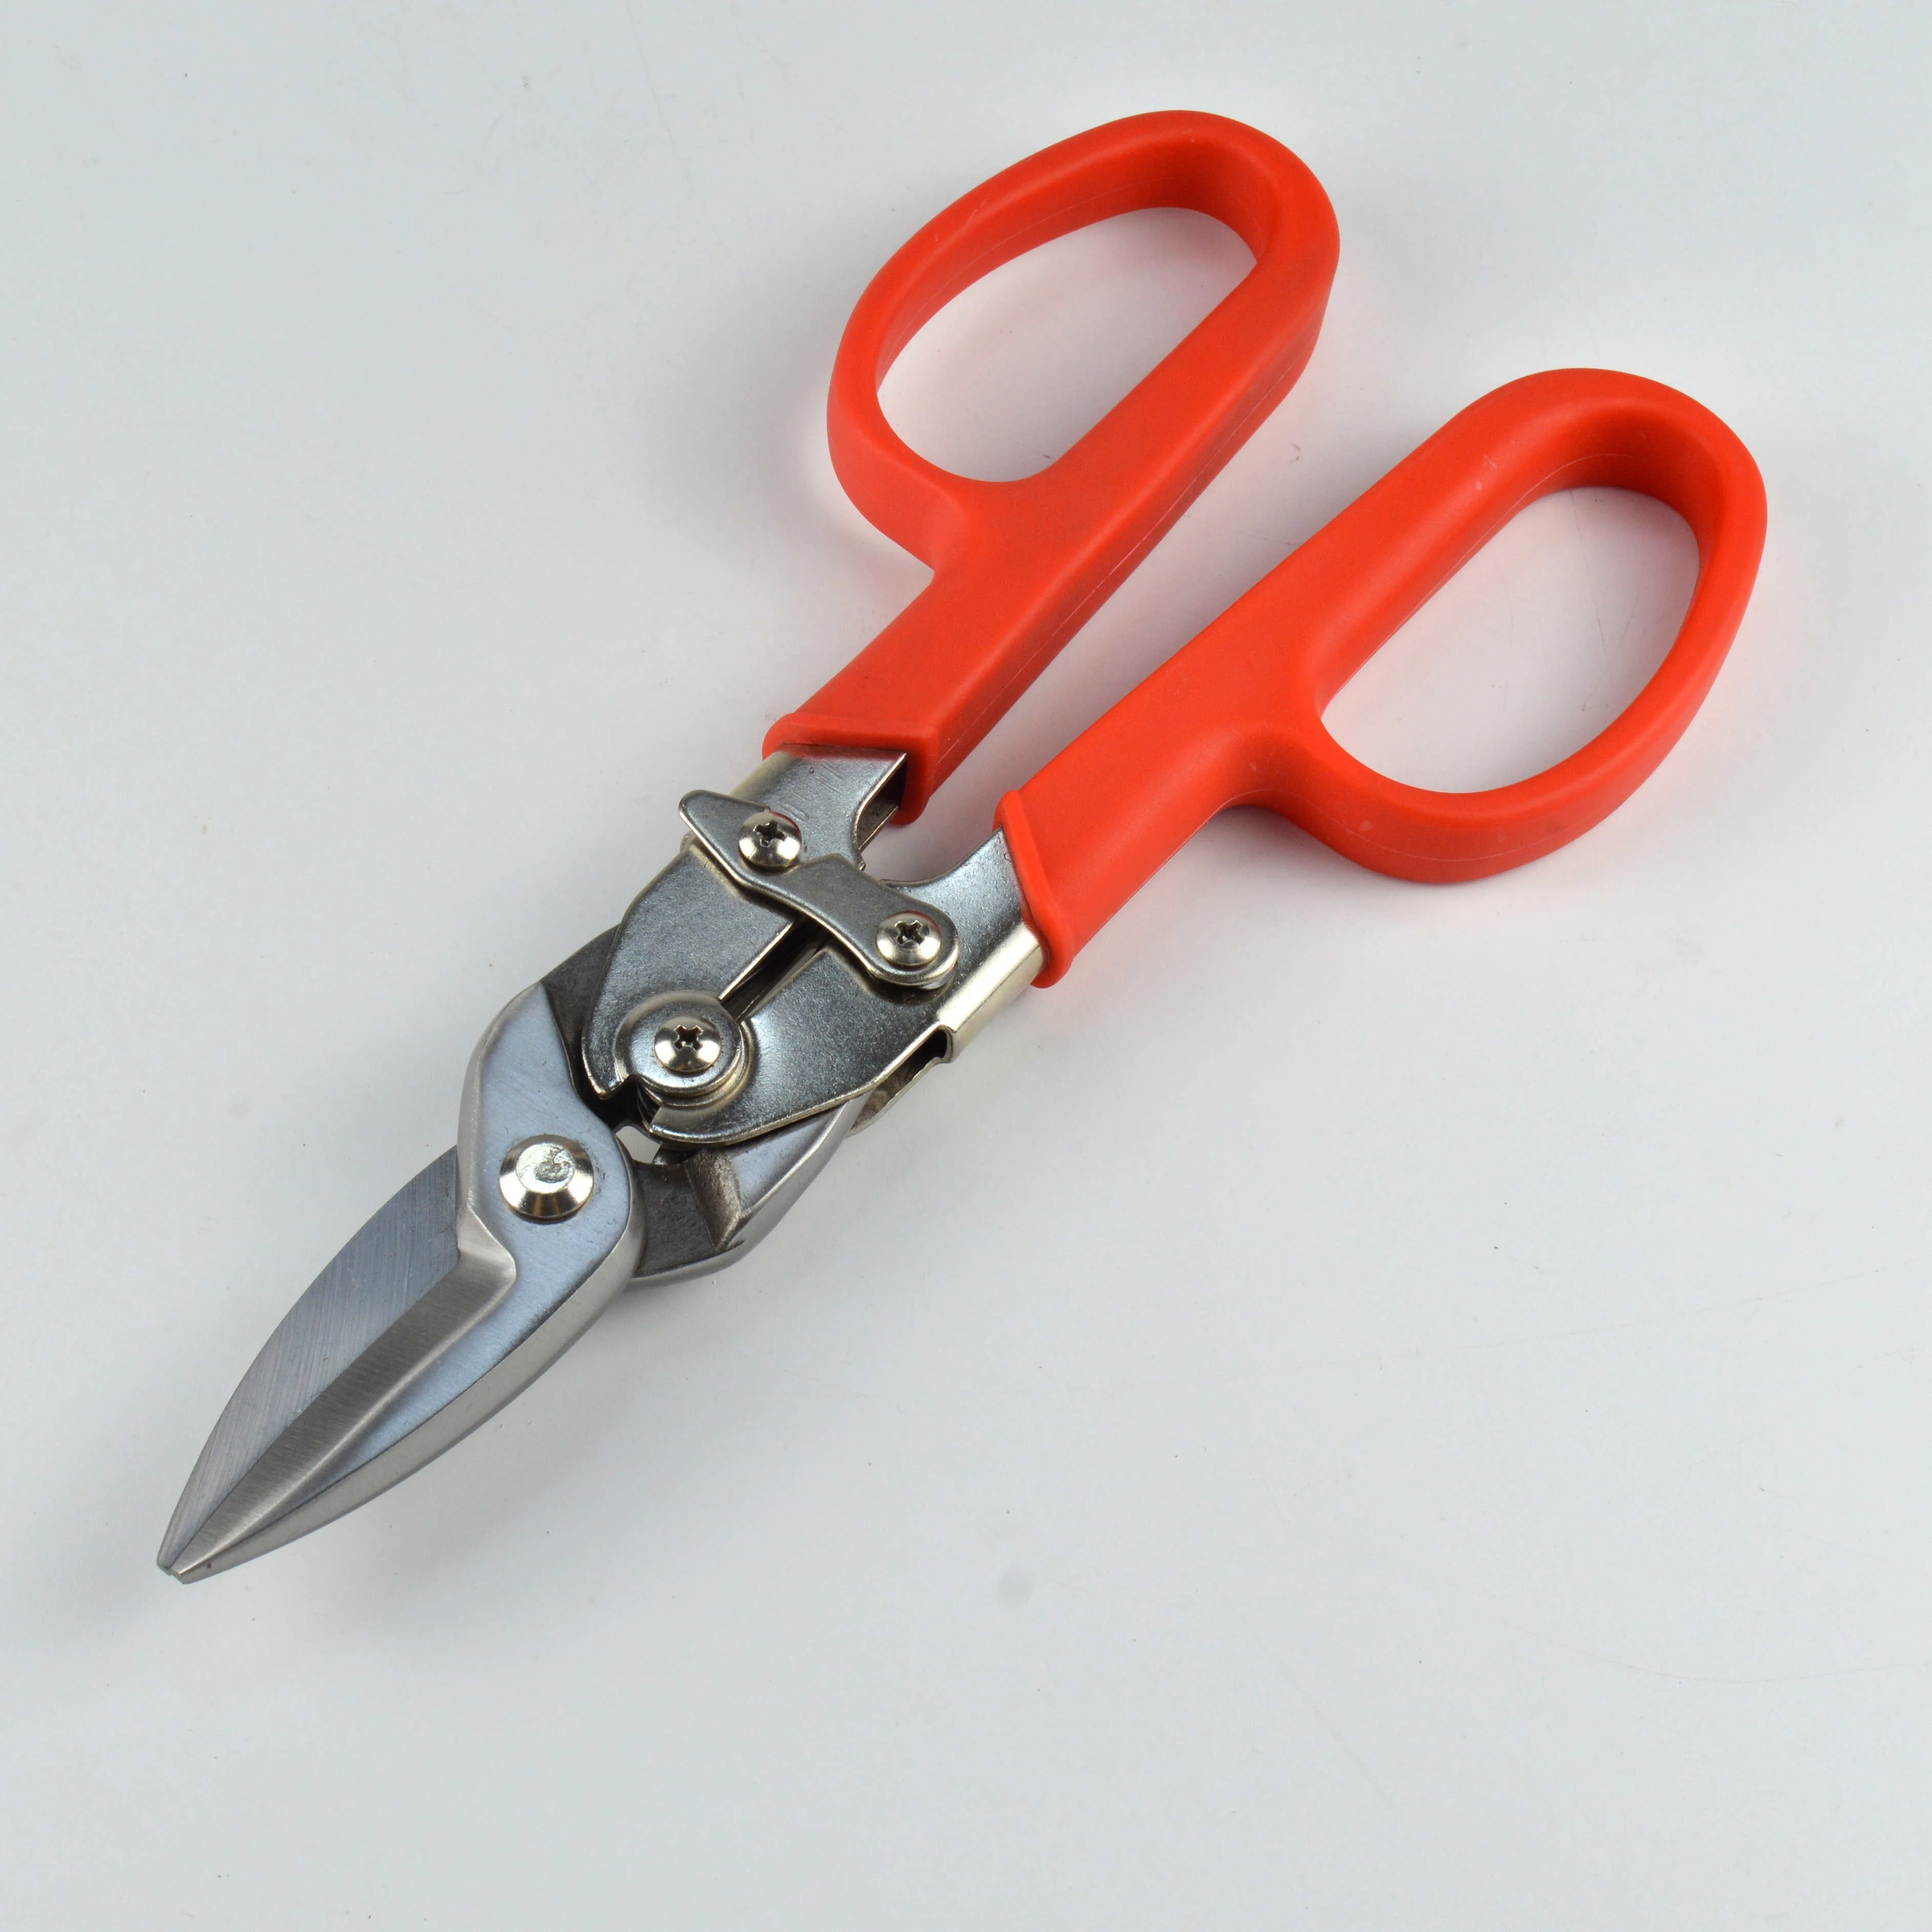 Hot Selling High Leverage Tin Snips Metal Shears Cutters Stainless Steel Iron Scissors